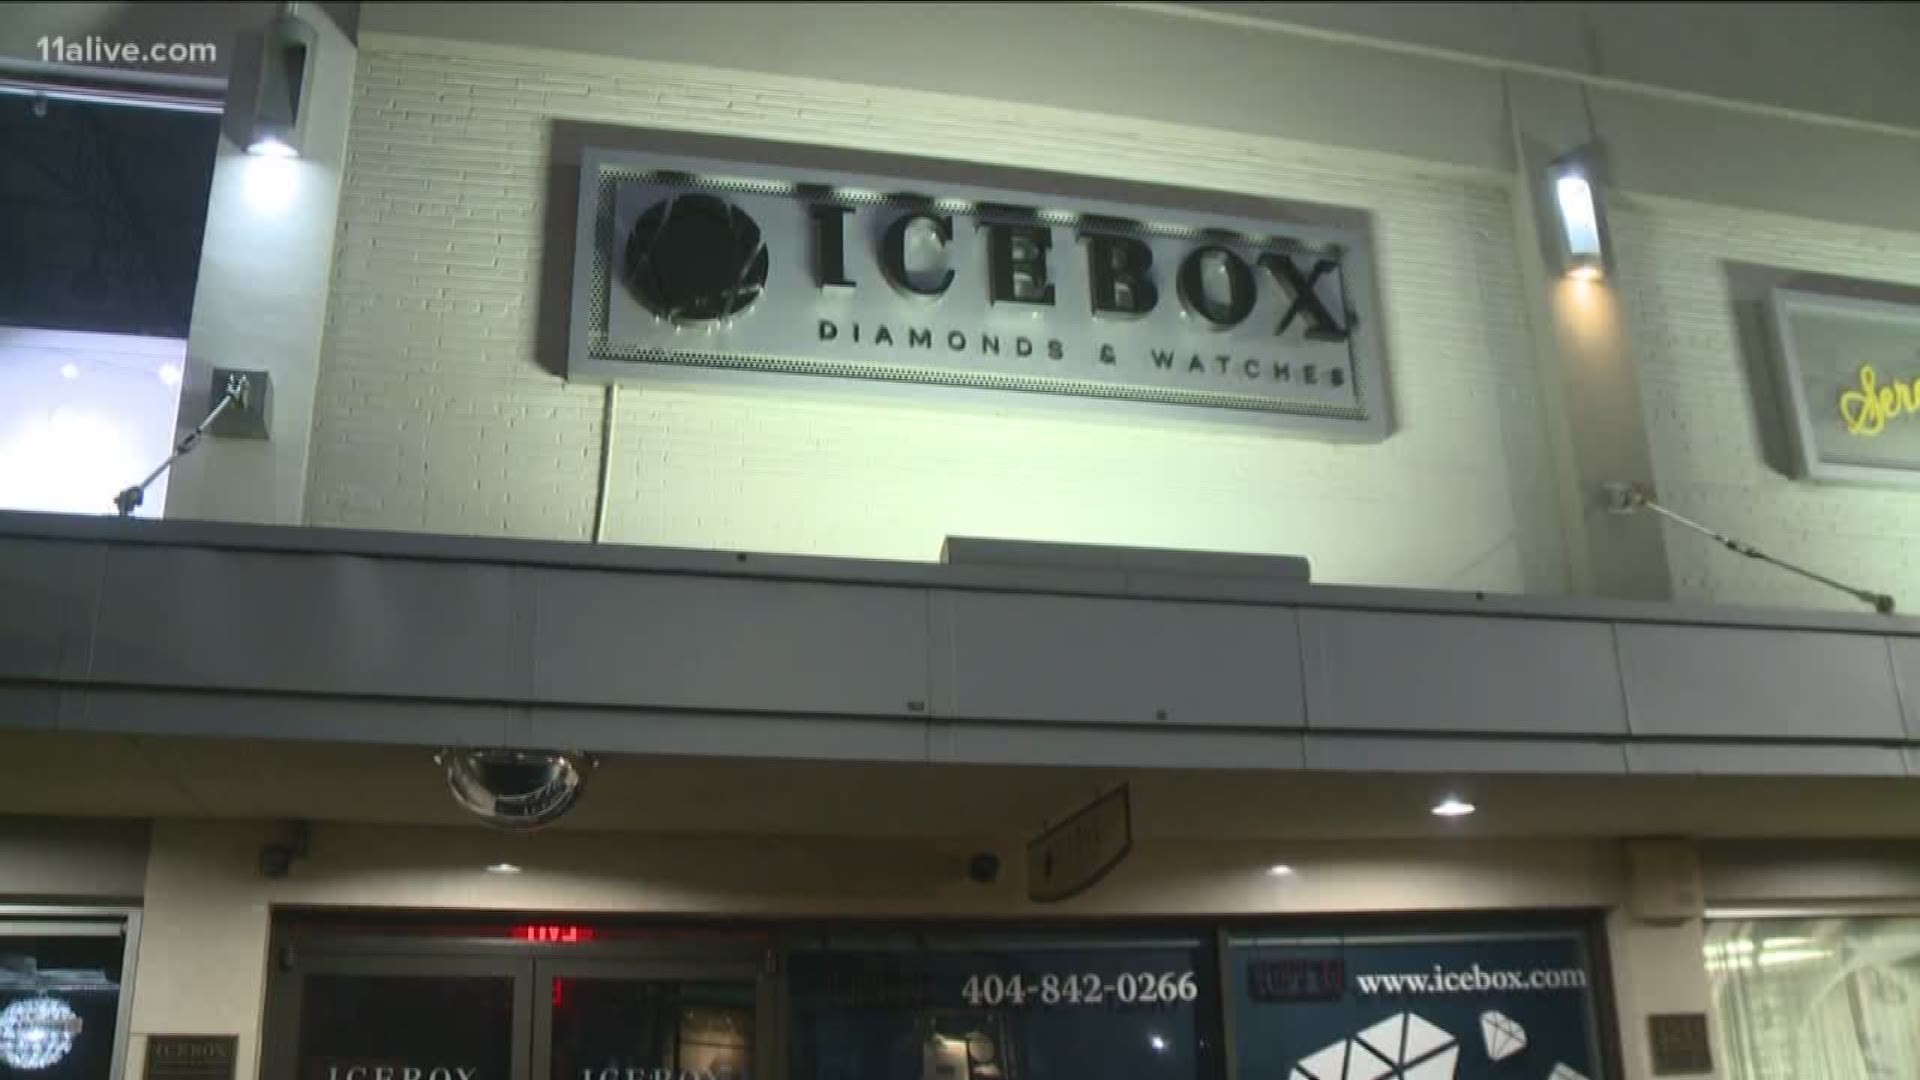 Authorities said five people had been charged in connection with the home invasion and subsequent burglary of Icebox Diamonds & Watches.